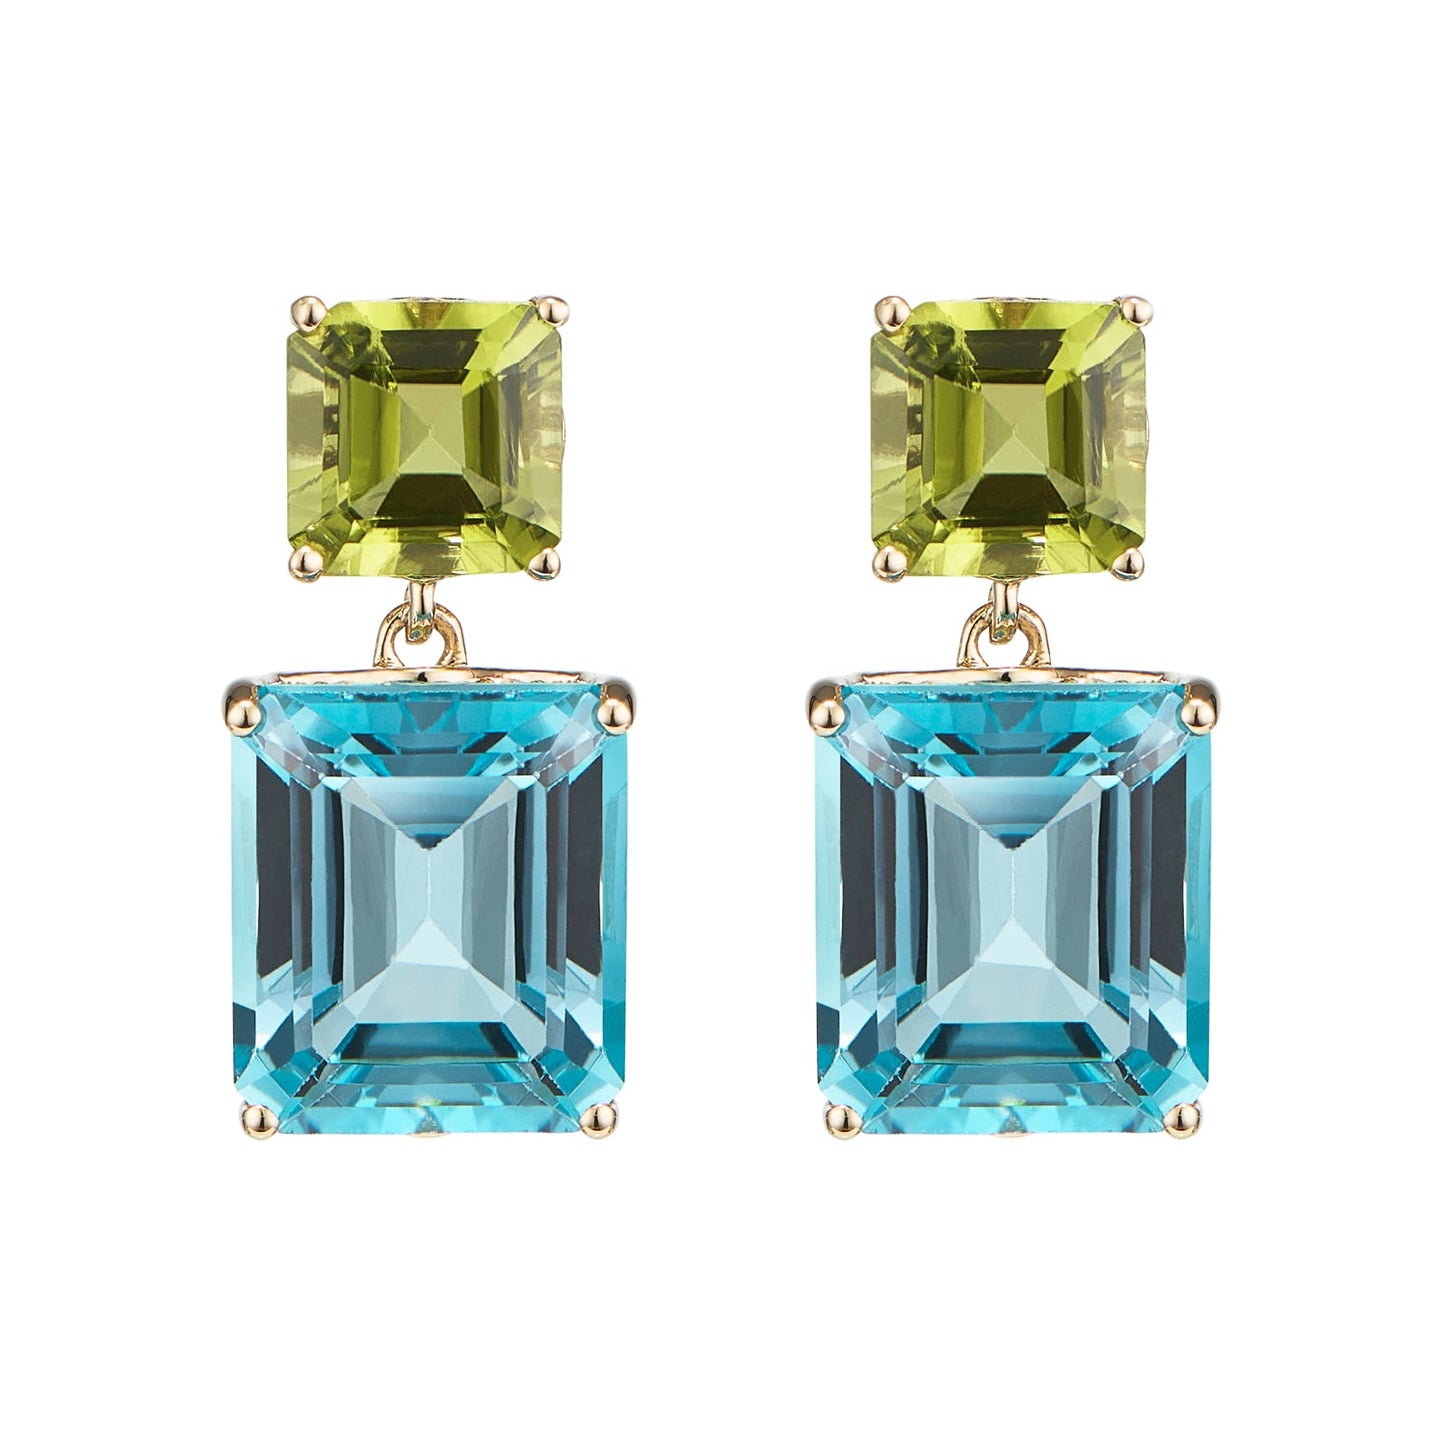 London-made luxury custom gold gemstone jewellery -9ct Yellow Gold Octagon Gold Drop Earrings in Peridot and Blue Topaz – Andalusian Collection, Augustine Jewellery, British Jewellers, Gemstone Jewellery, Luxury Jewellery London.